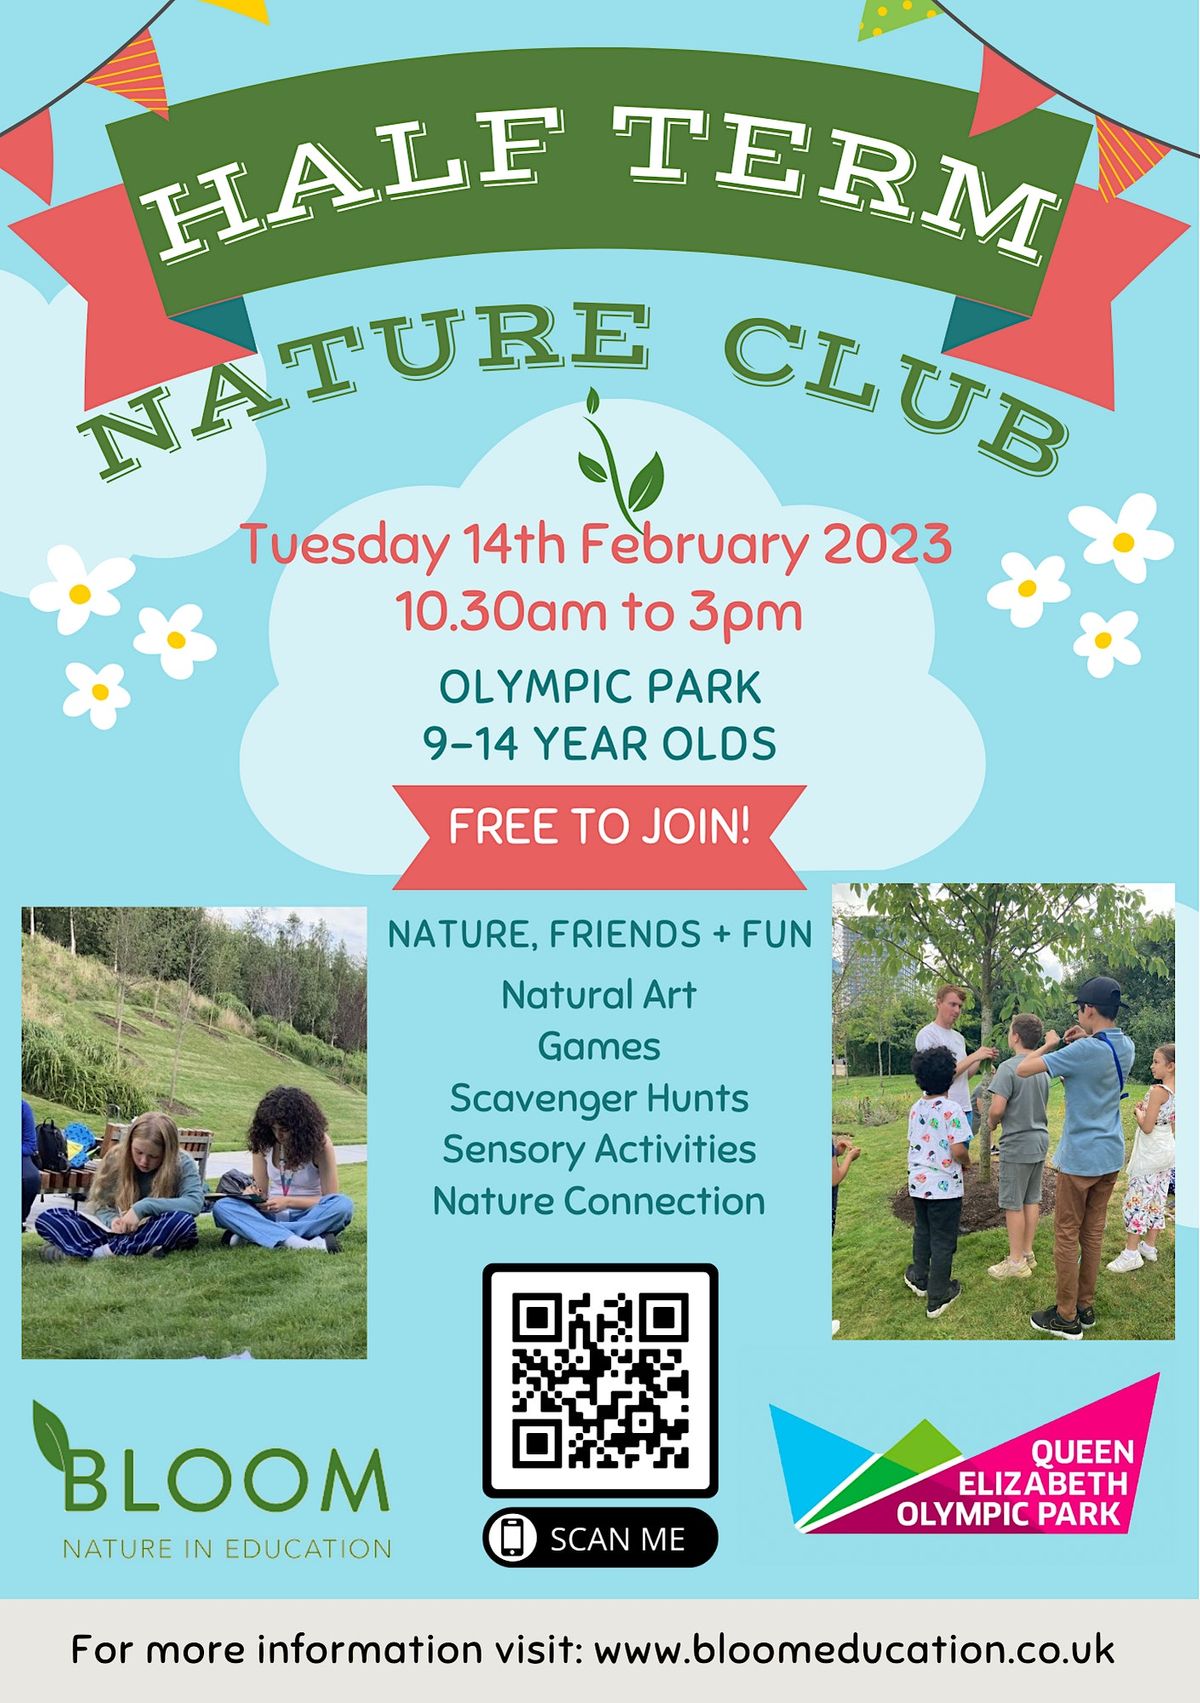 Easter Holiday Nature Club